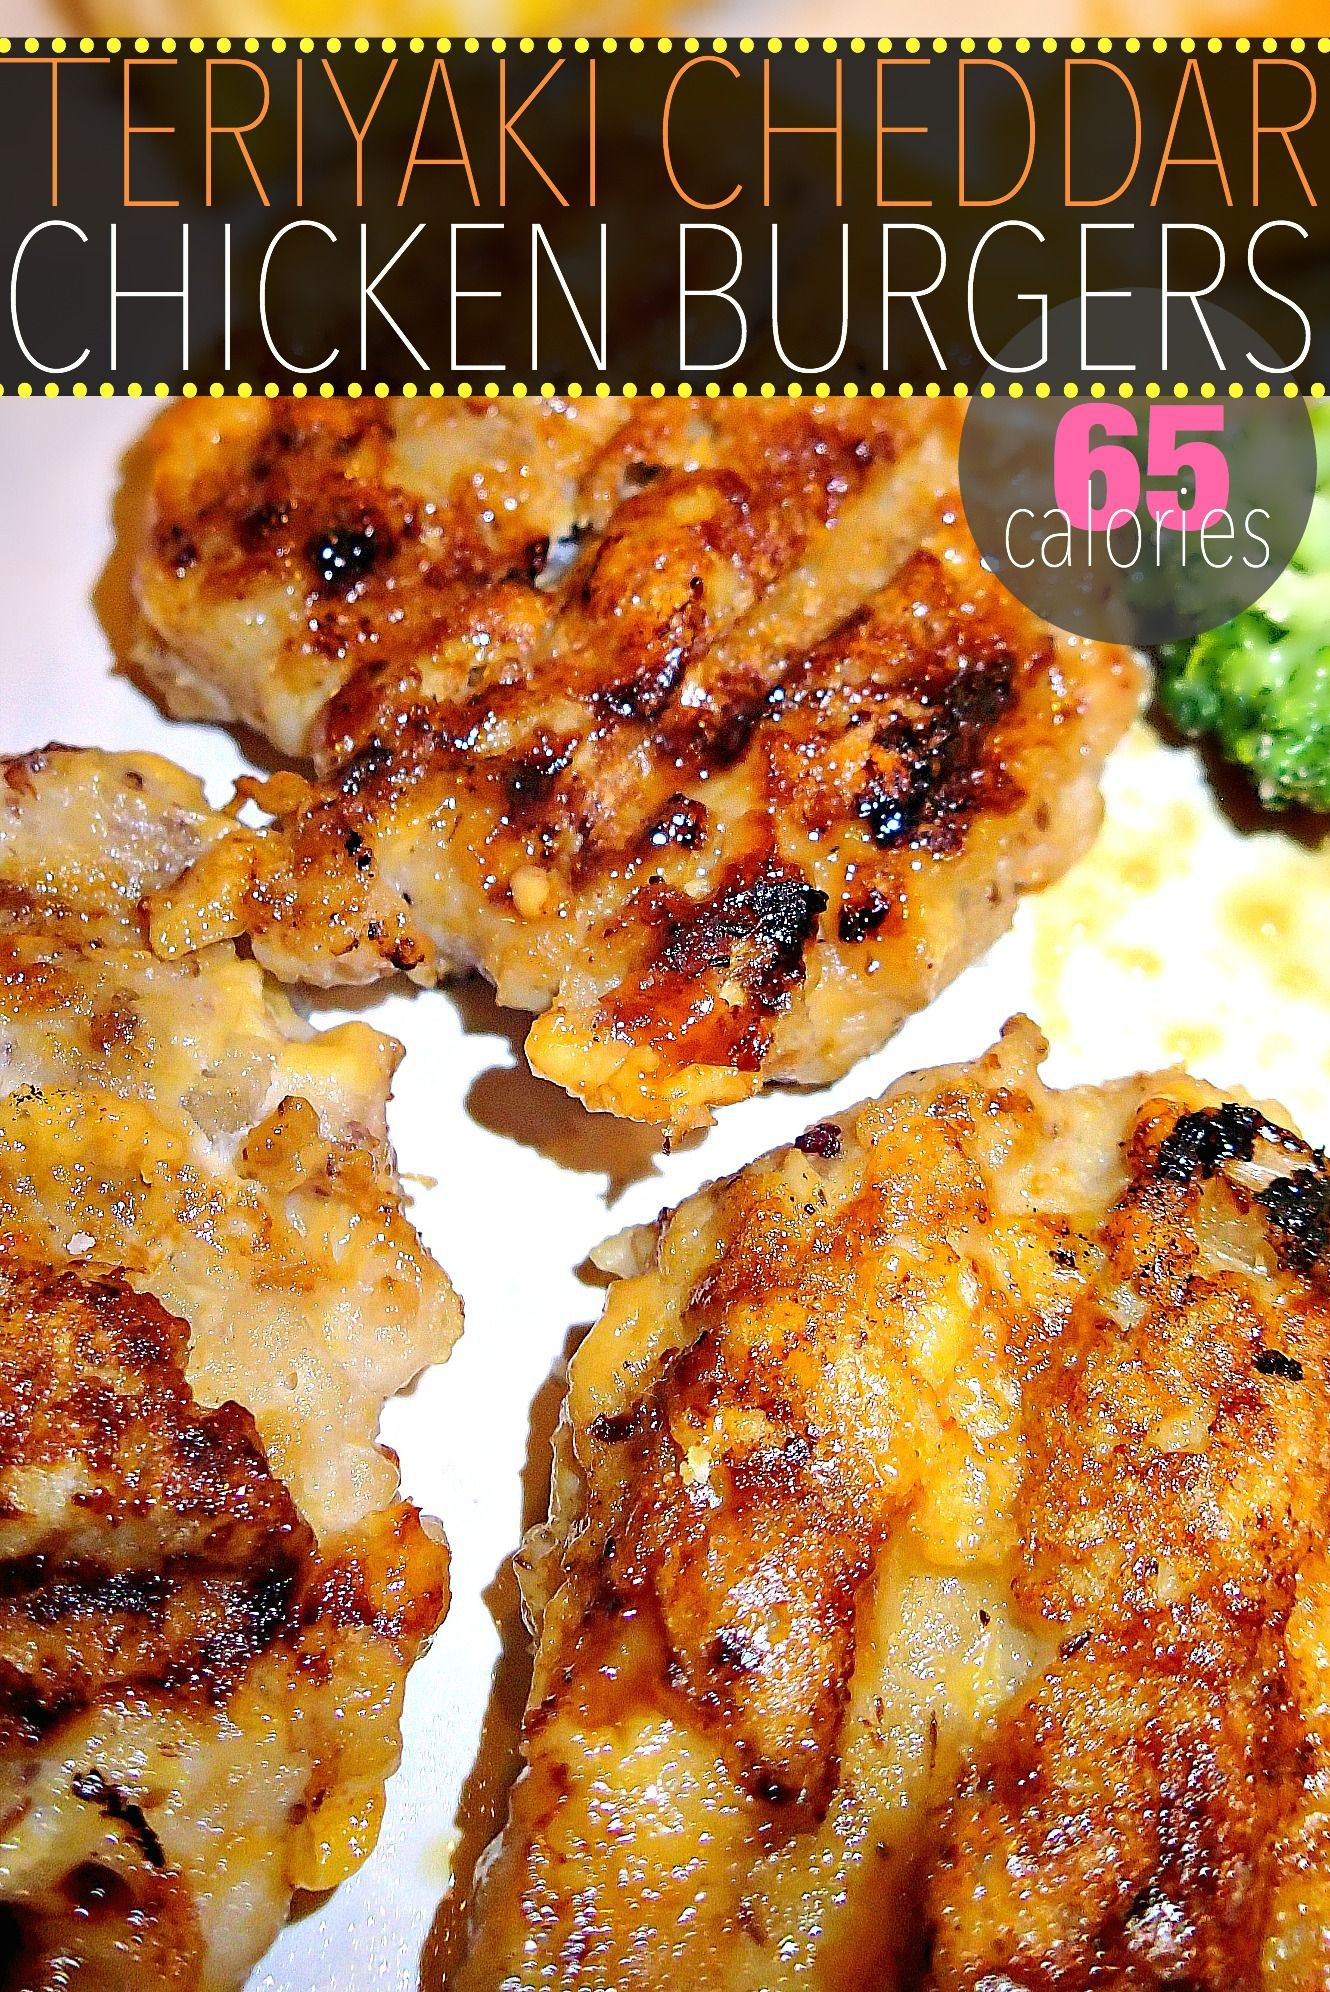 Low Calorie Ground Chicken Recipes
 65 Calorie Teriyaki Cheddar Chicken Burgers